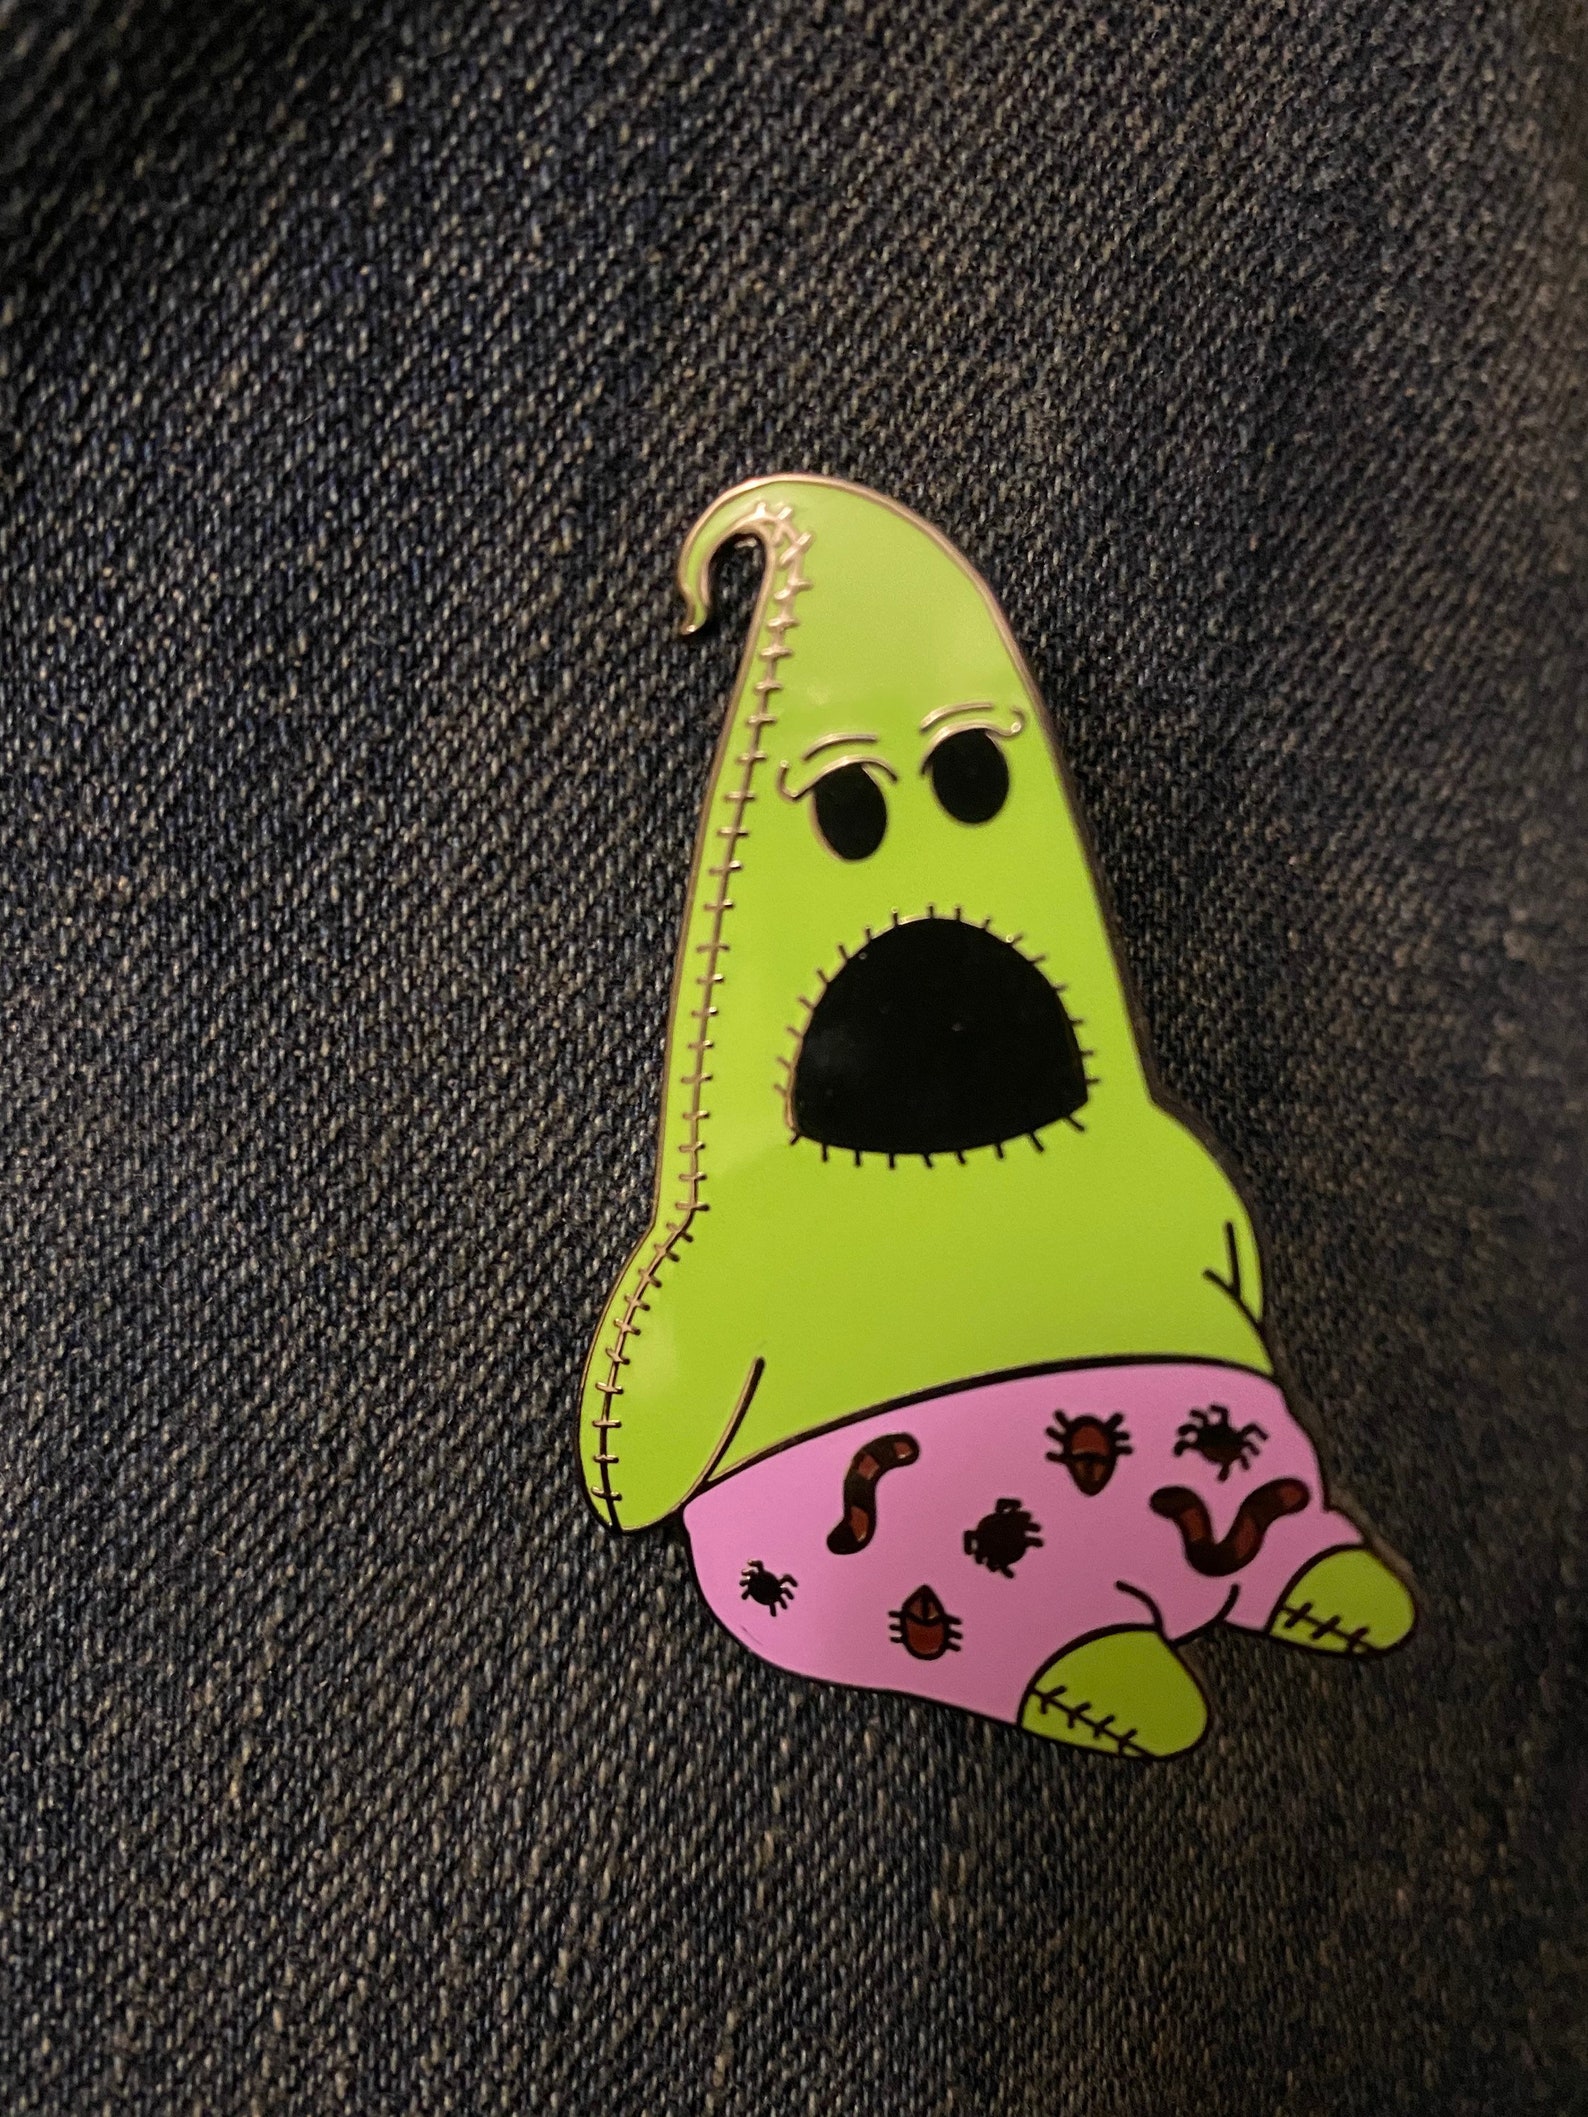 Oogie Boogie Patrick 2 pin | Etsy